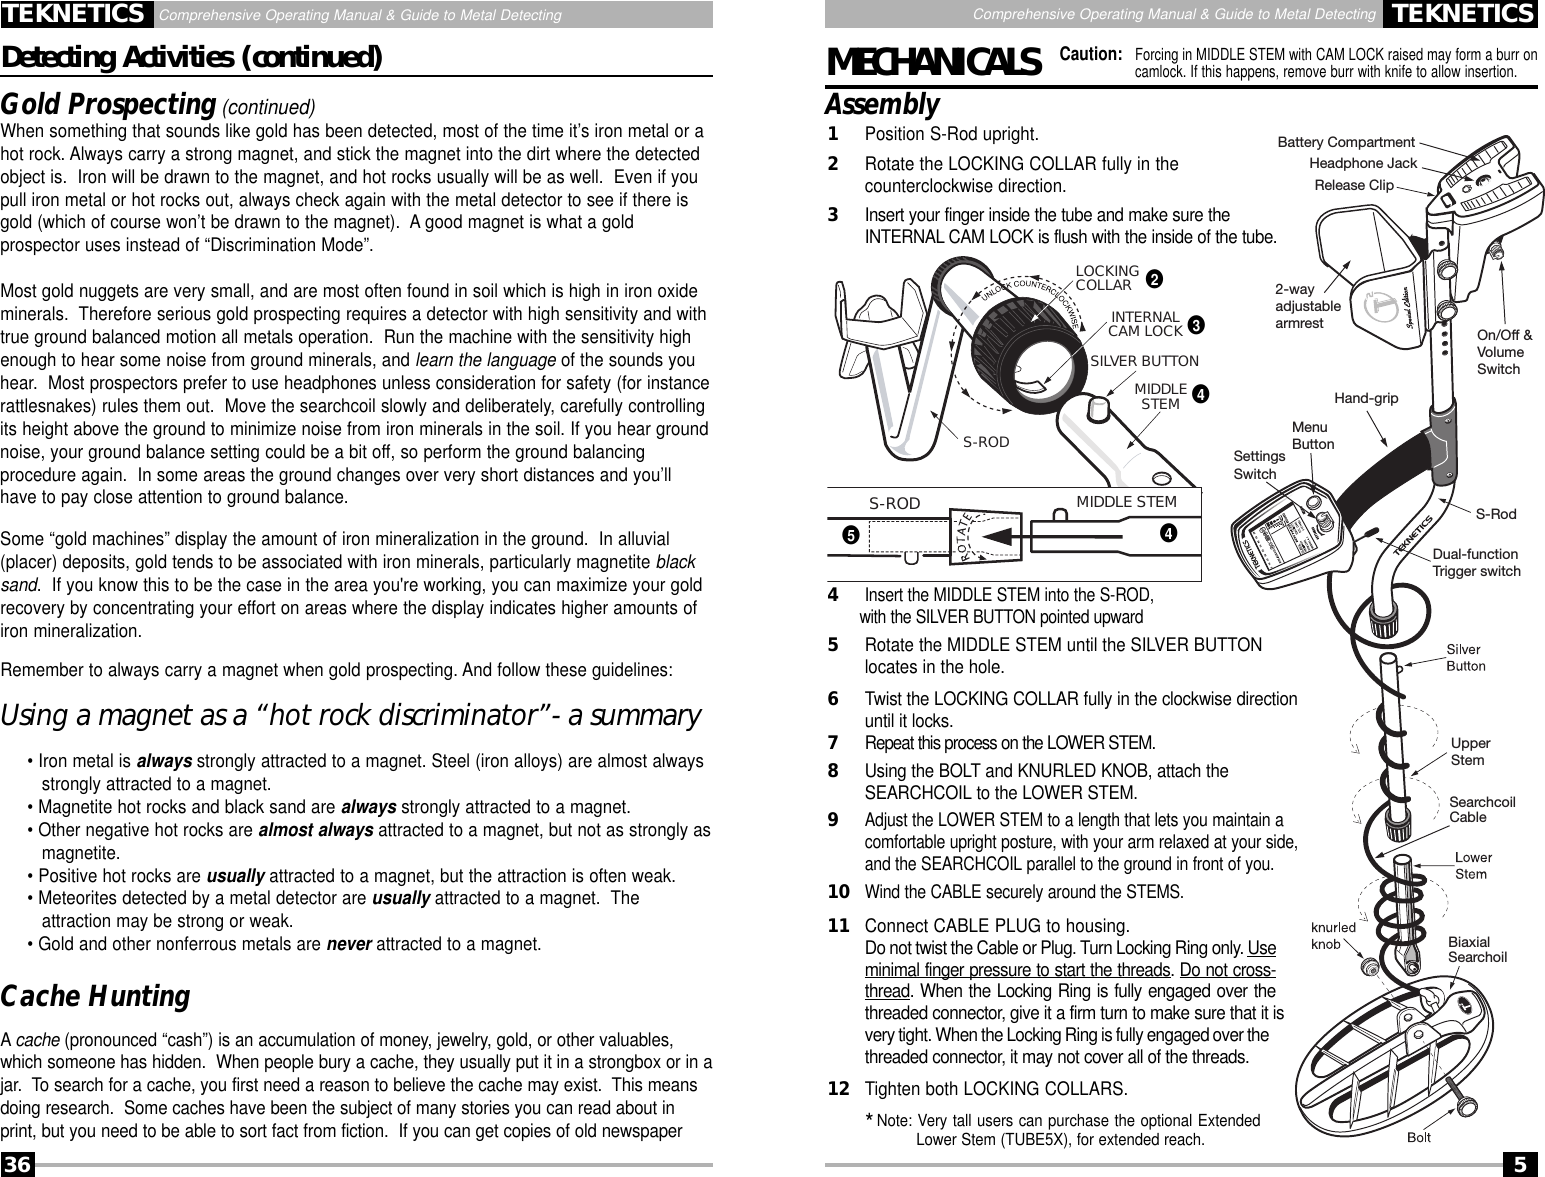 Page 36 of First Texas T2MD Professional Metal Detector User Manual Layout 1